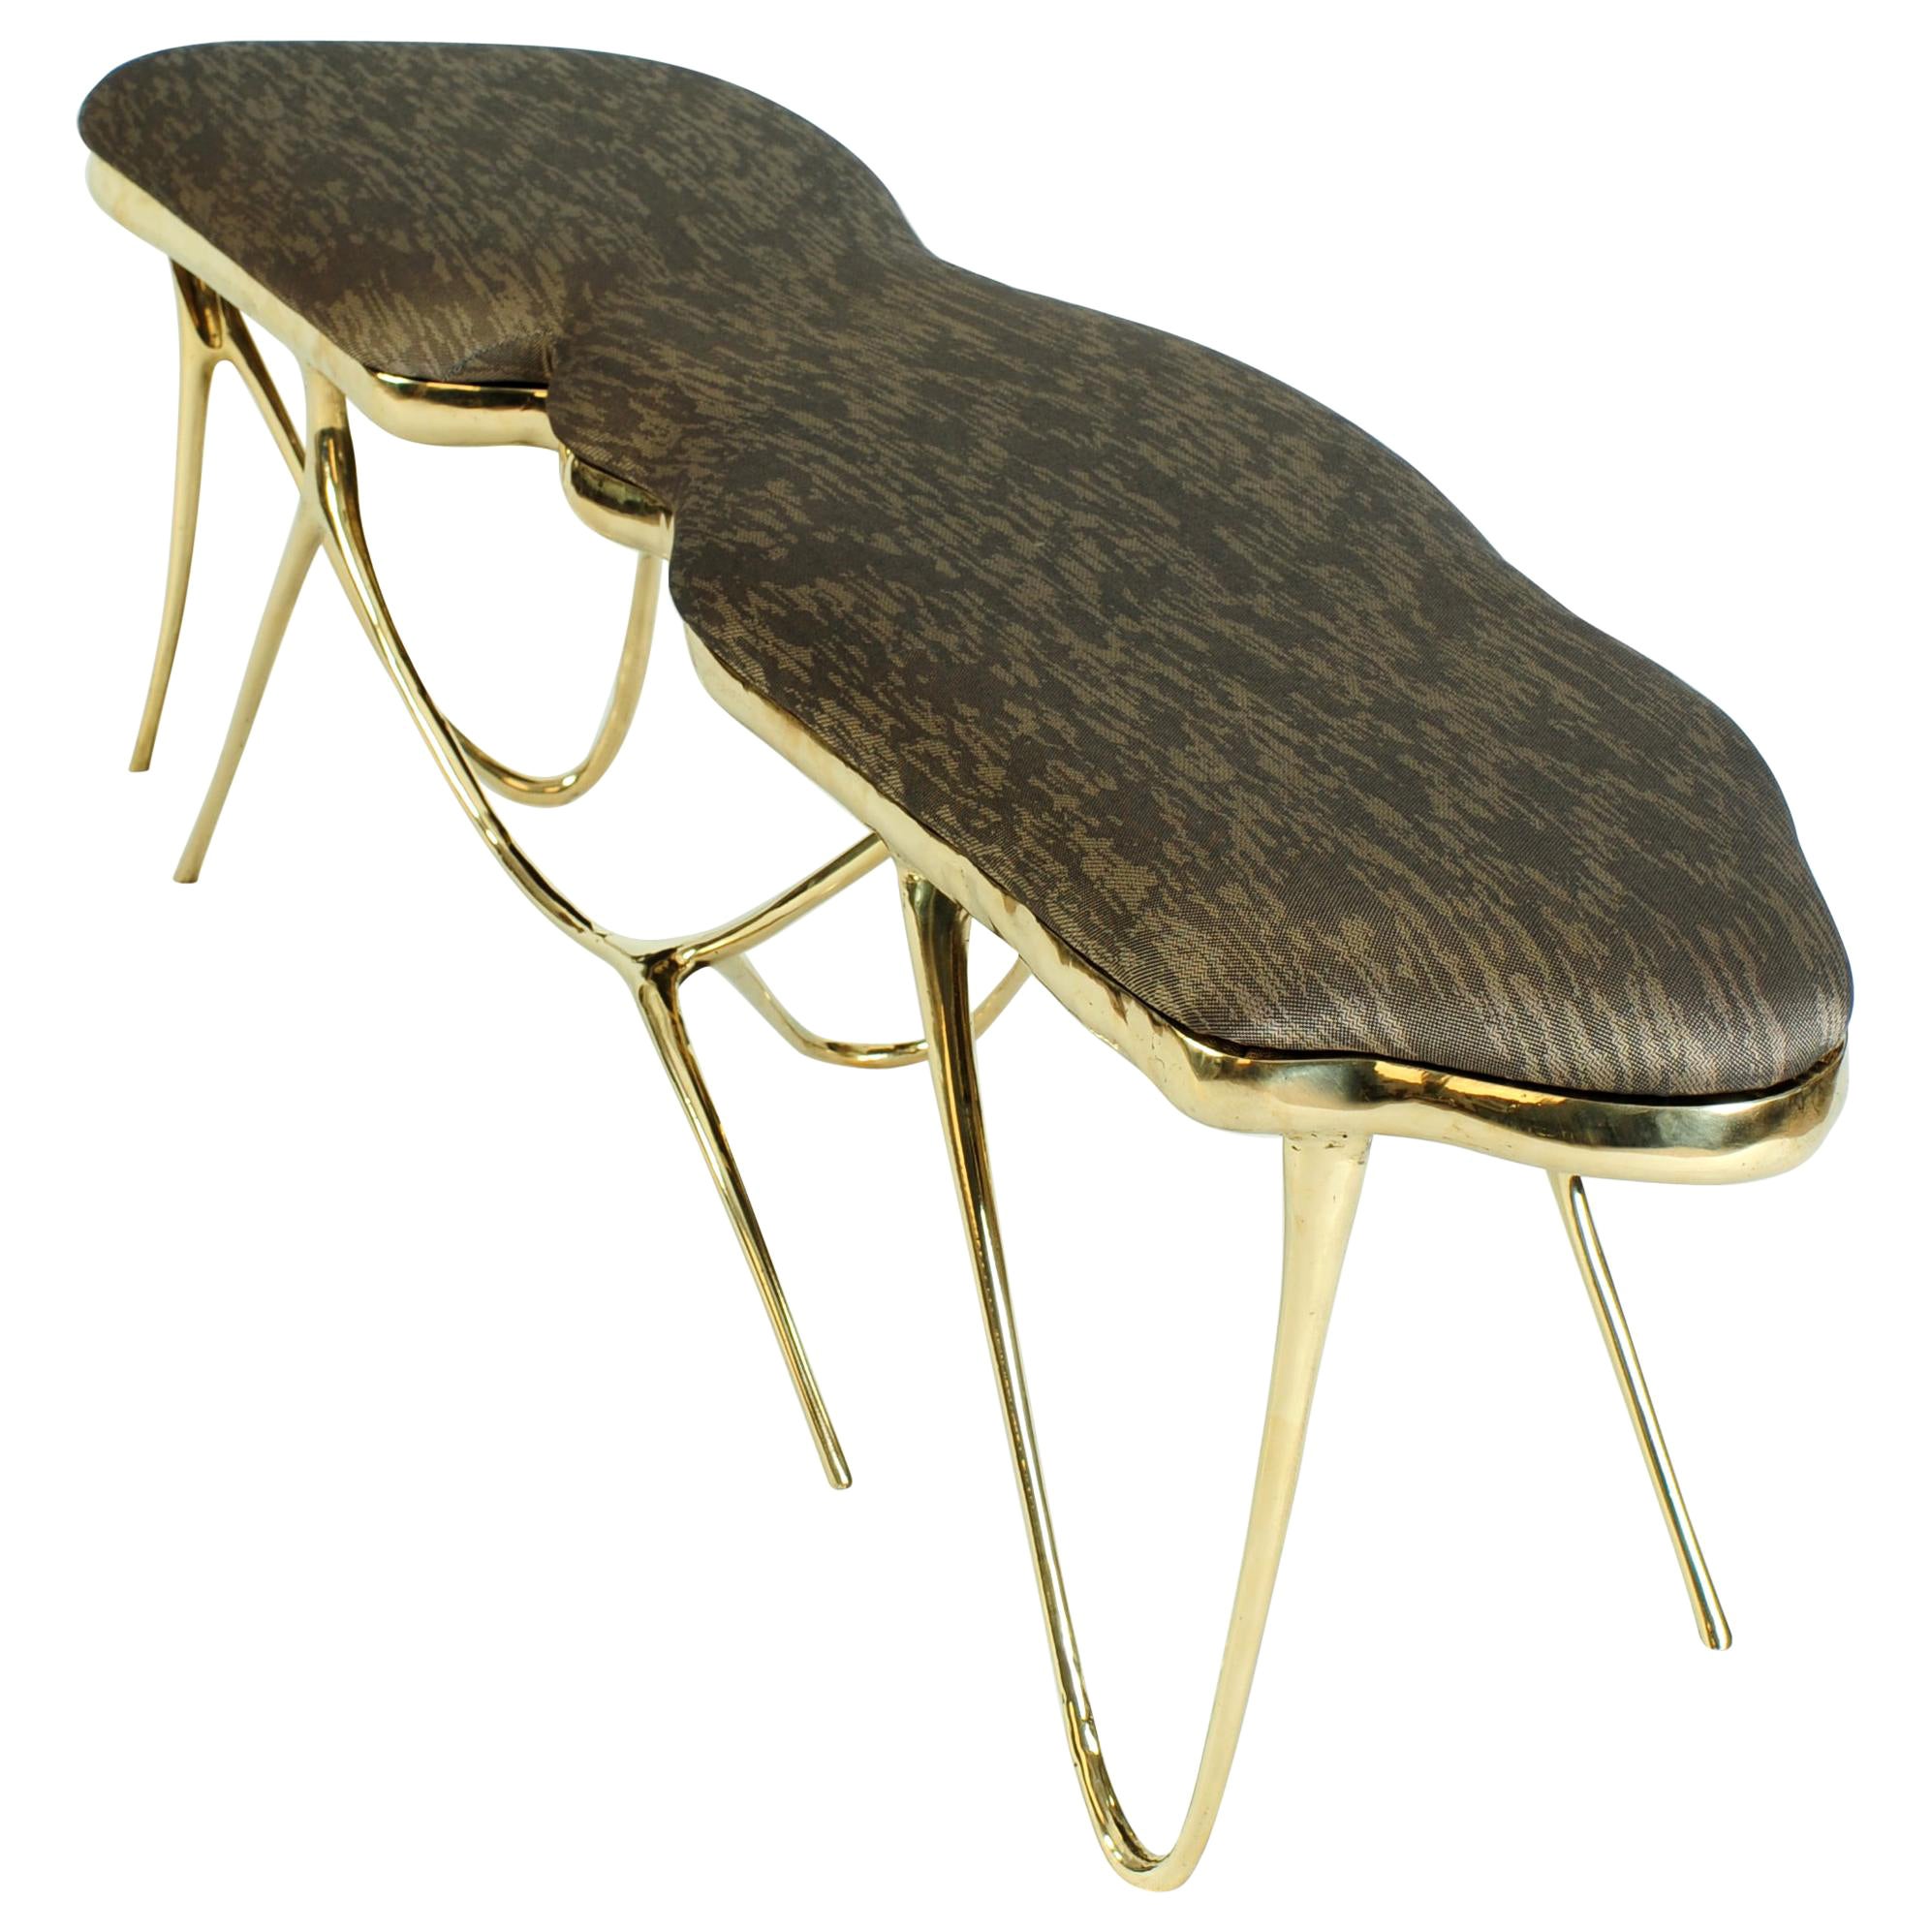 Calligraphic Sculpted Brass Bench by Misaya For Sale